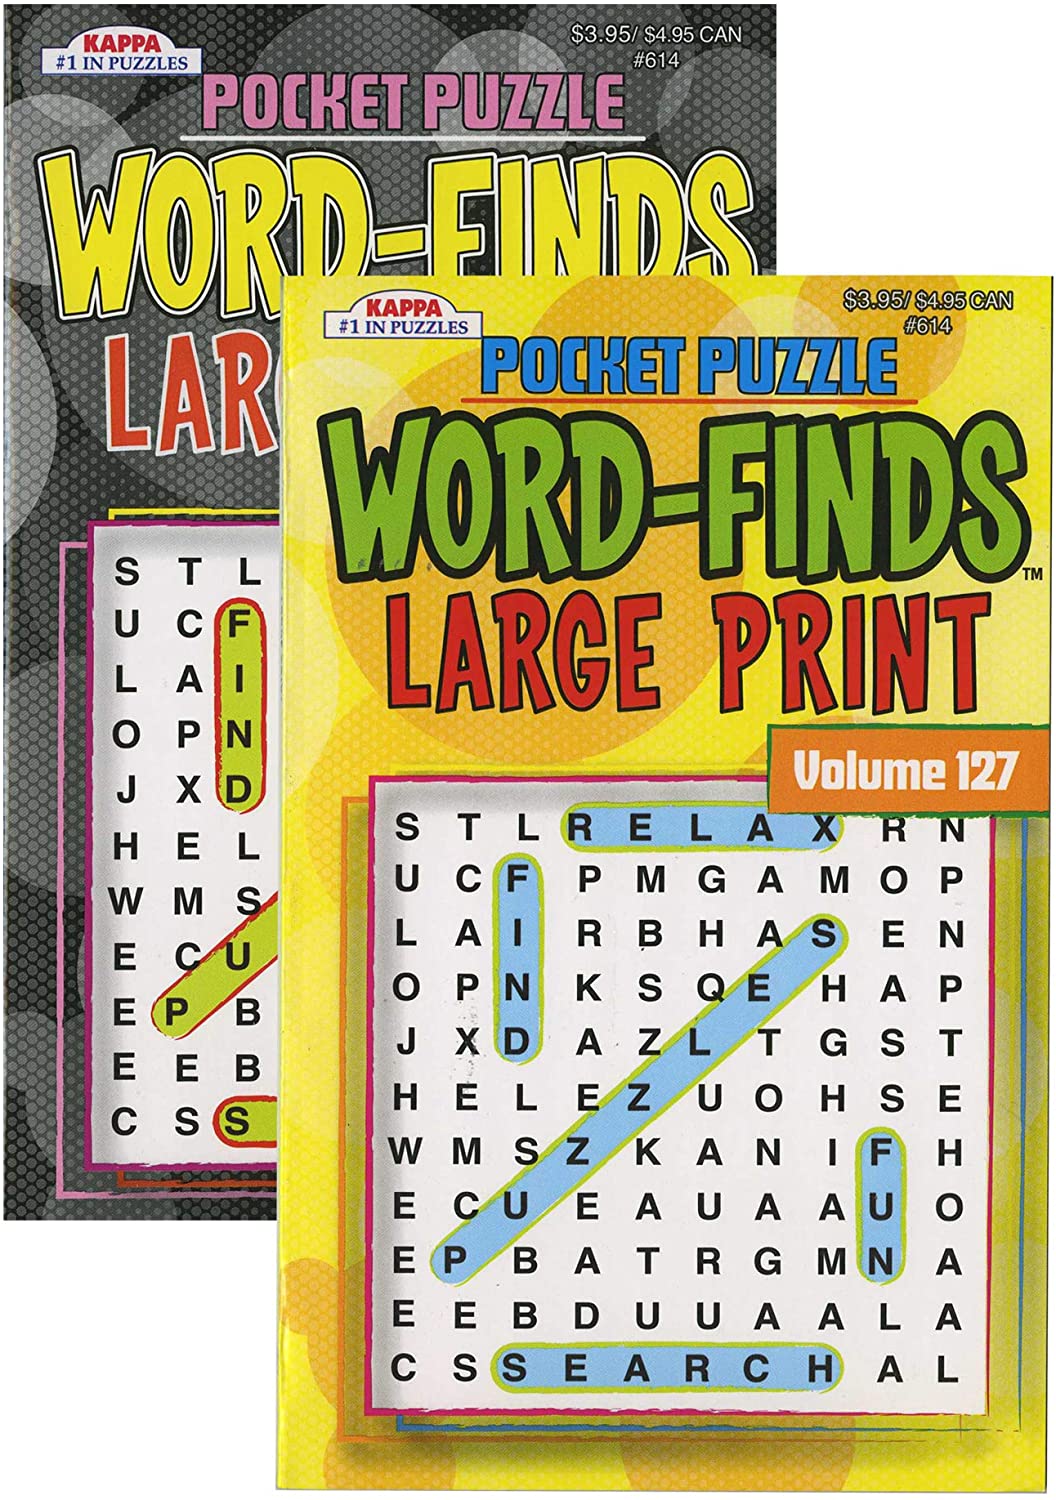 KAPPA Pocket Puzzle Word Finds Large Print | Digest Size.